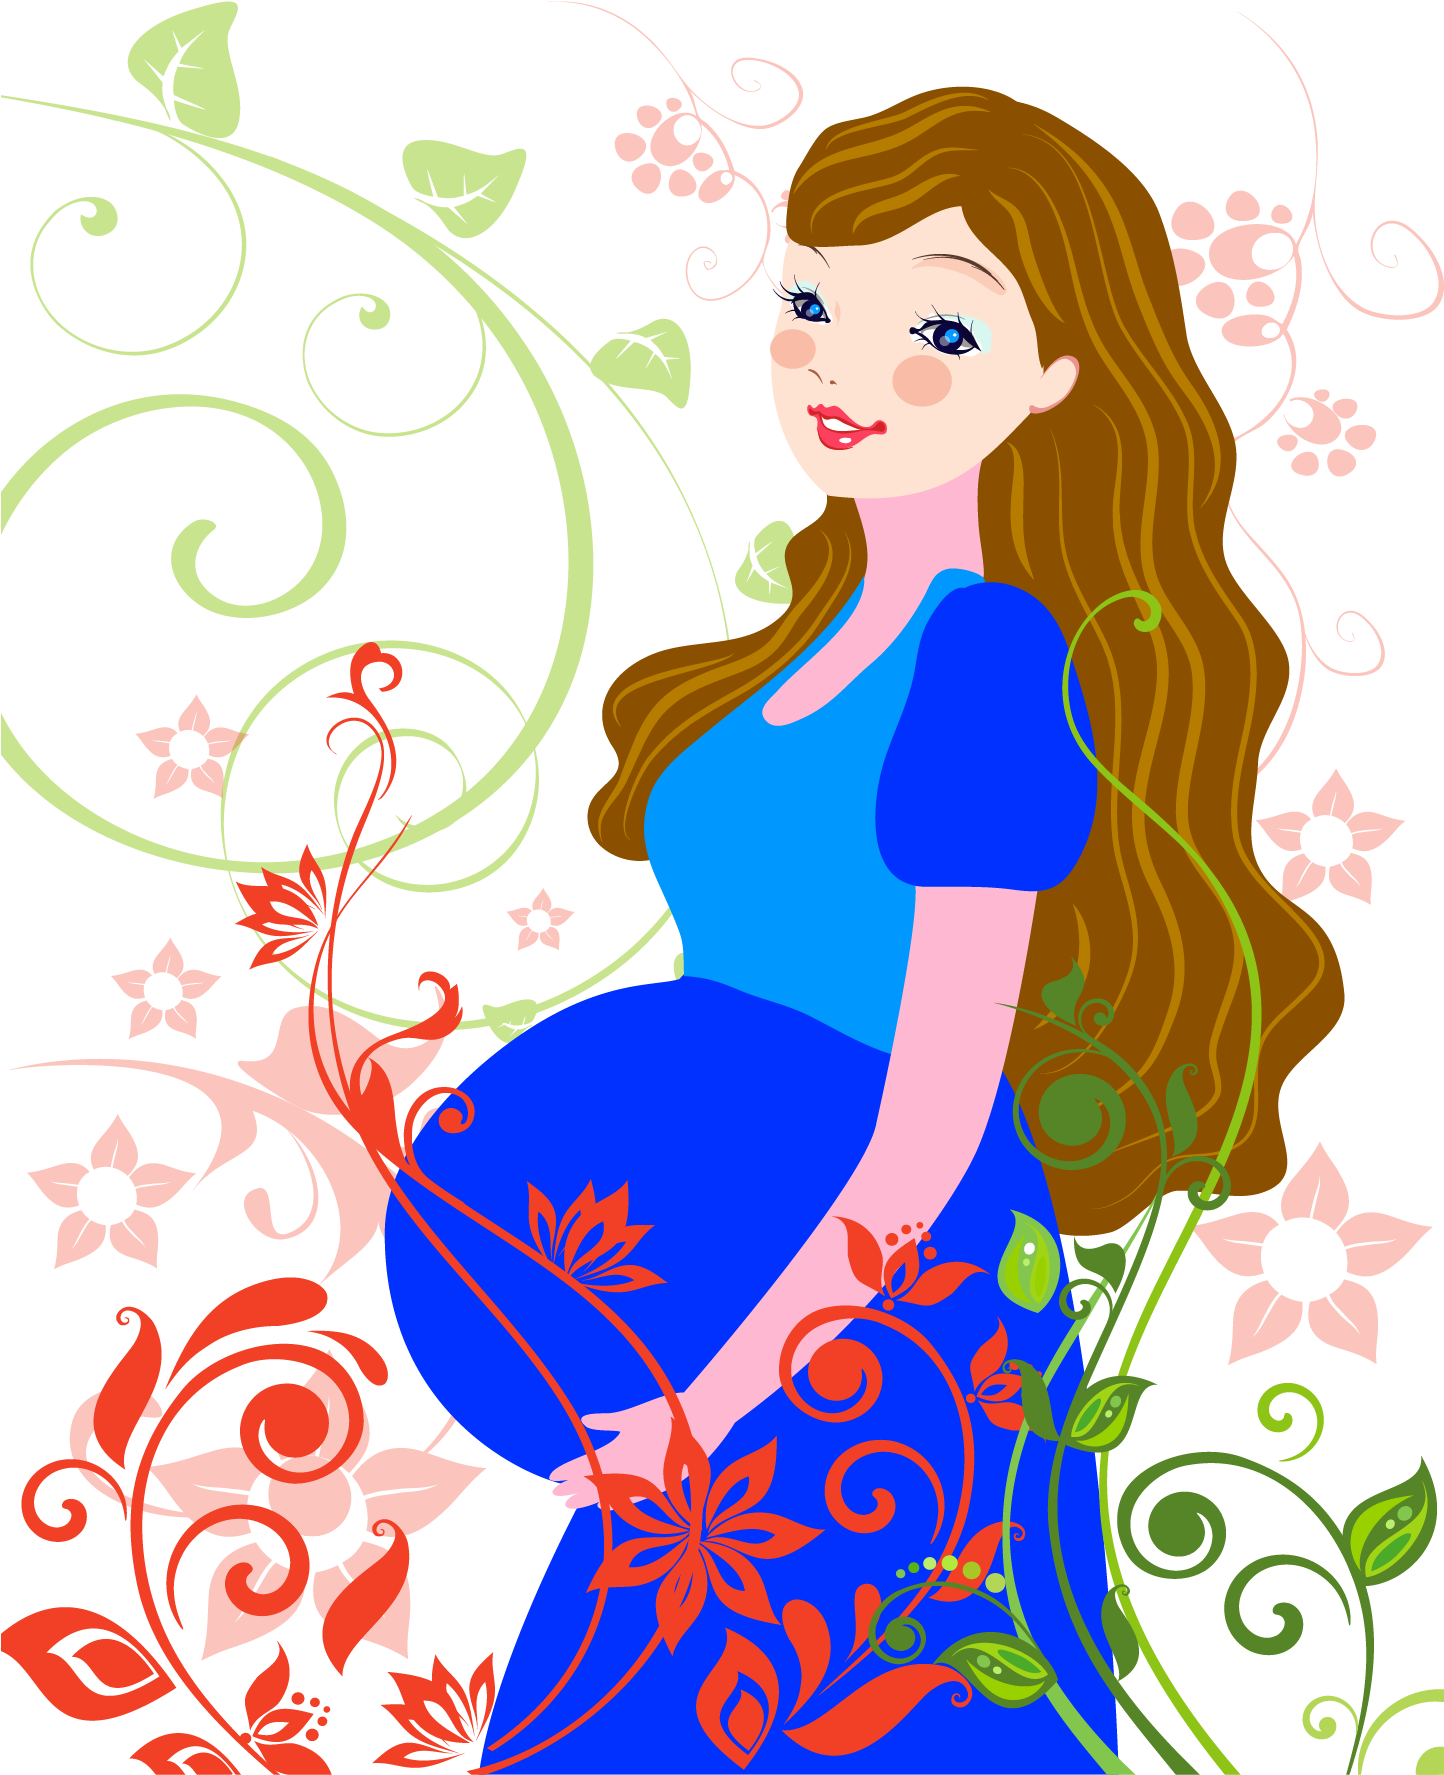 Download and share clipart about Pregnancy Mother Illustration - Mom Is Pre...